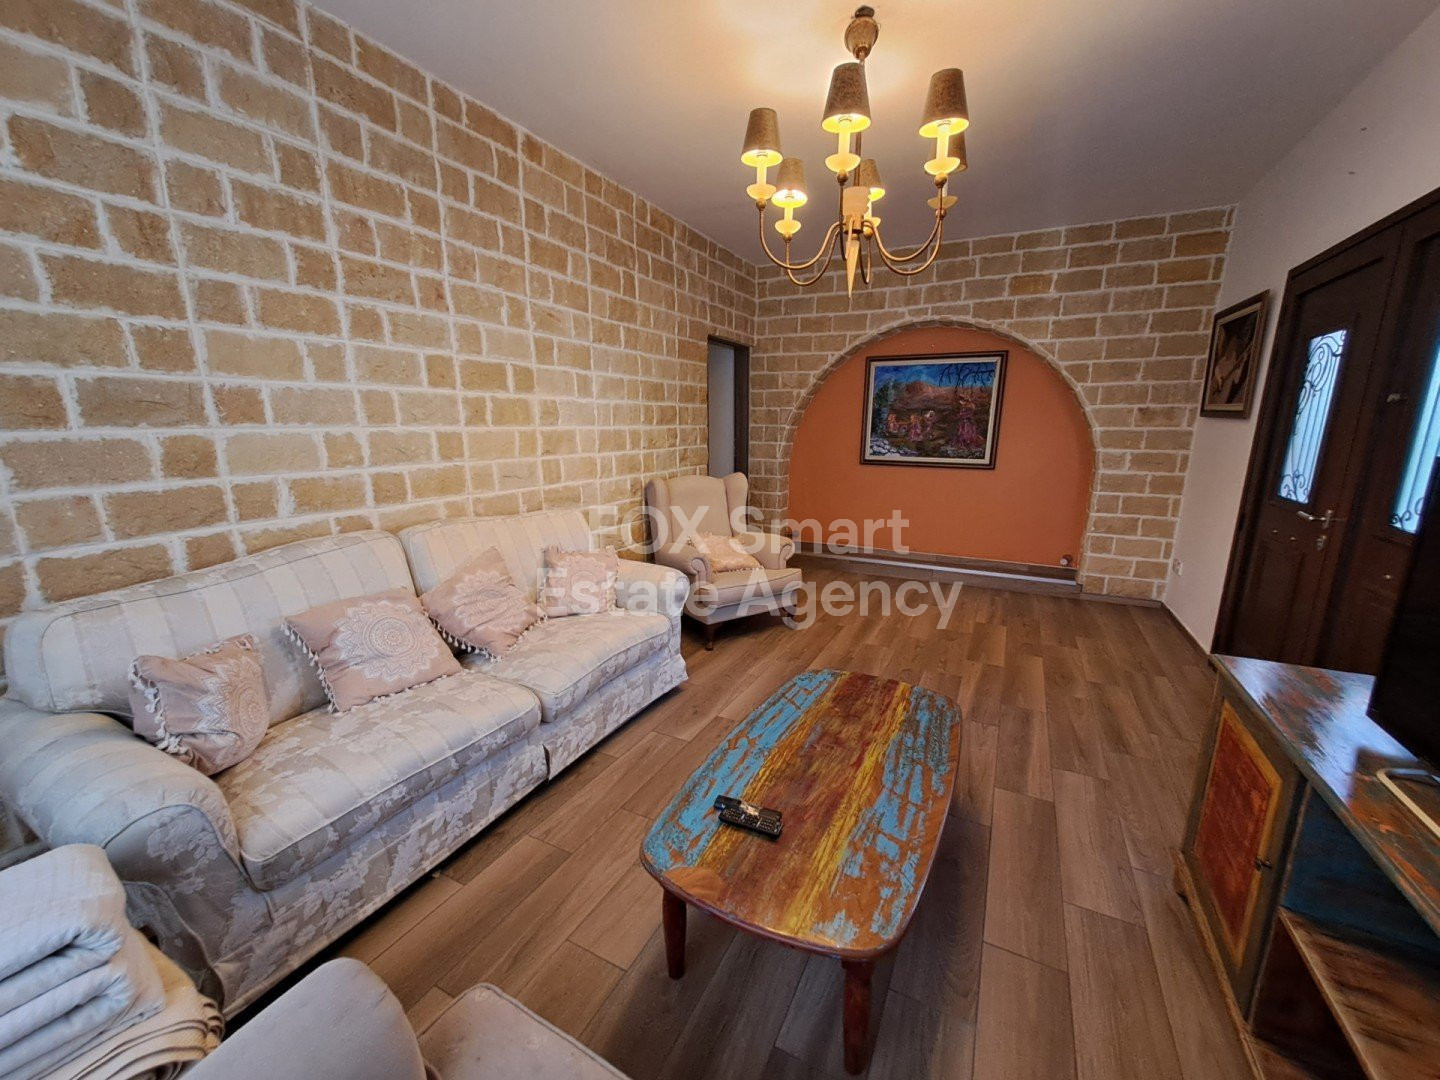 House, For Rent, Limassol, Mouttagiaka  4 Bedrooms 2 Bathroo.....